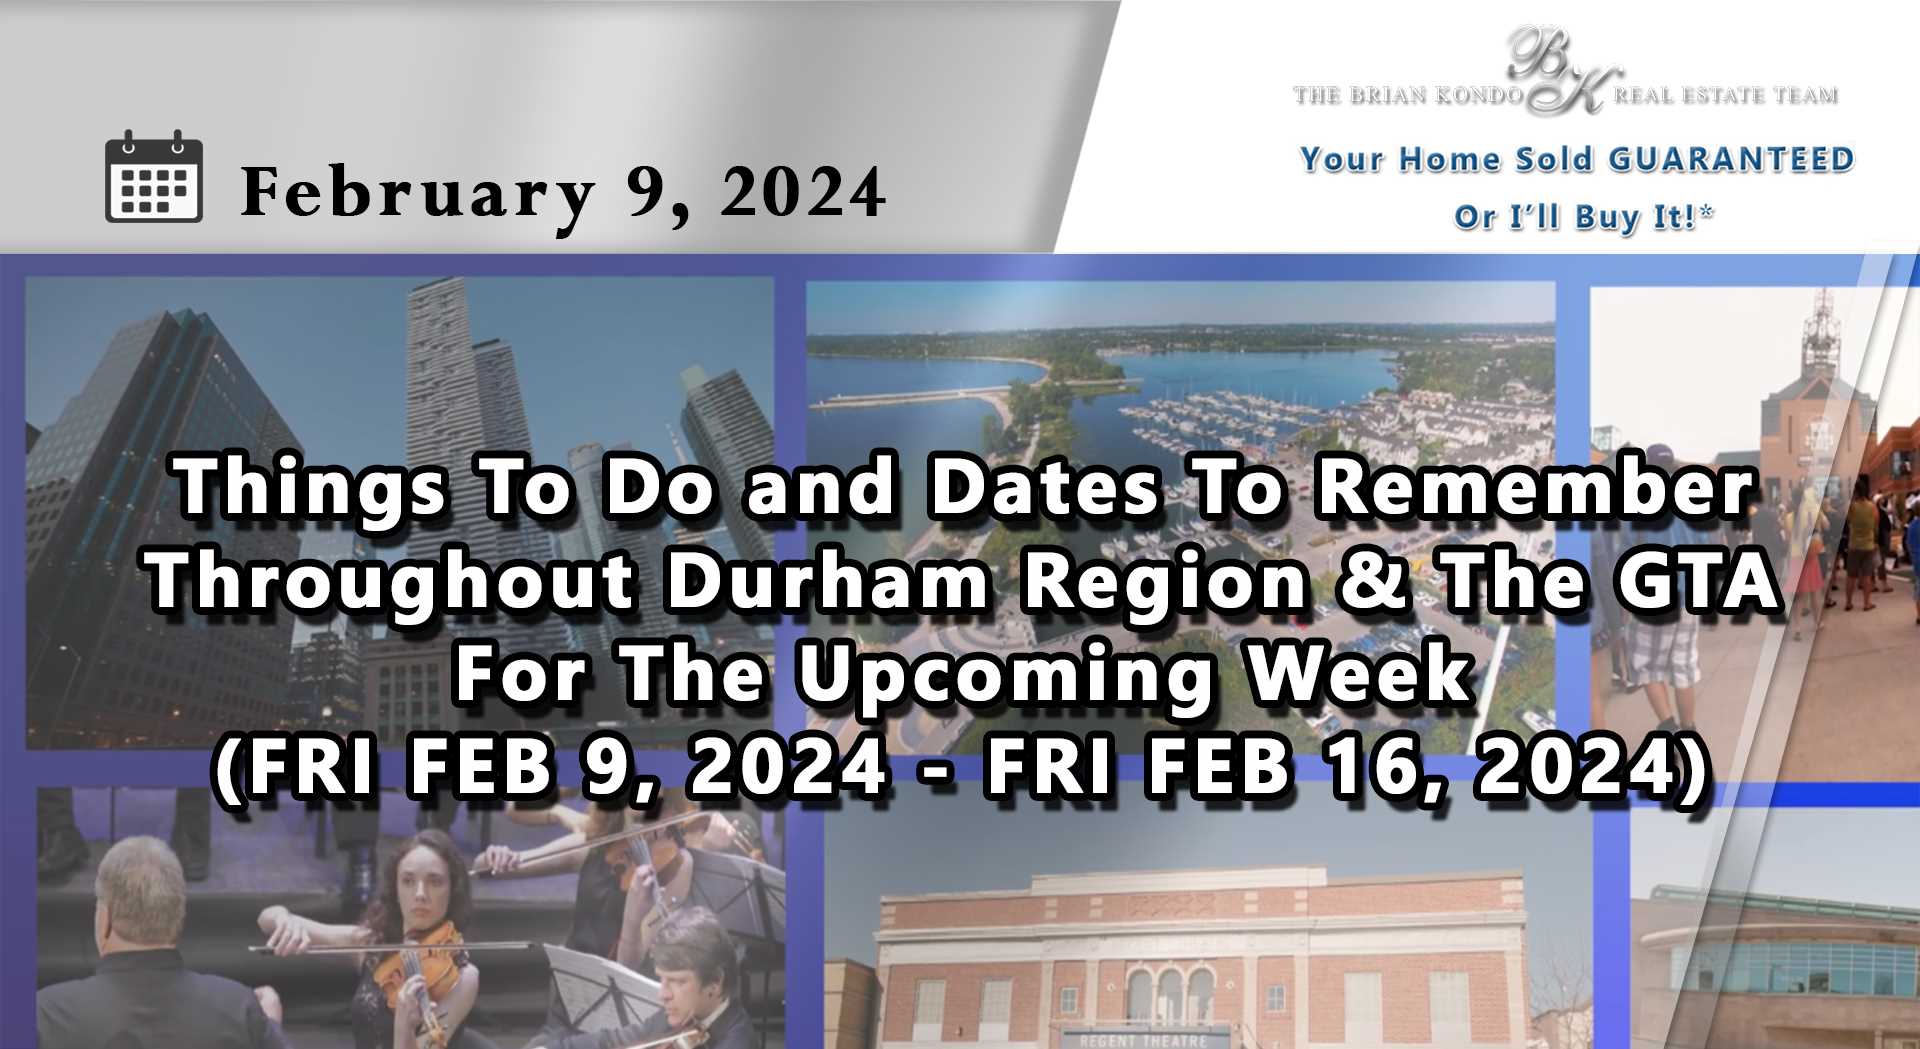 Things To Do and Dates To Remember Throughout Durham Region and The GTA For The Upcoming Week (FRI FEB 9, 2024 - FRI FEB 16, 2024)